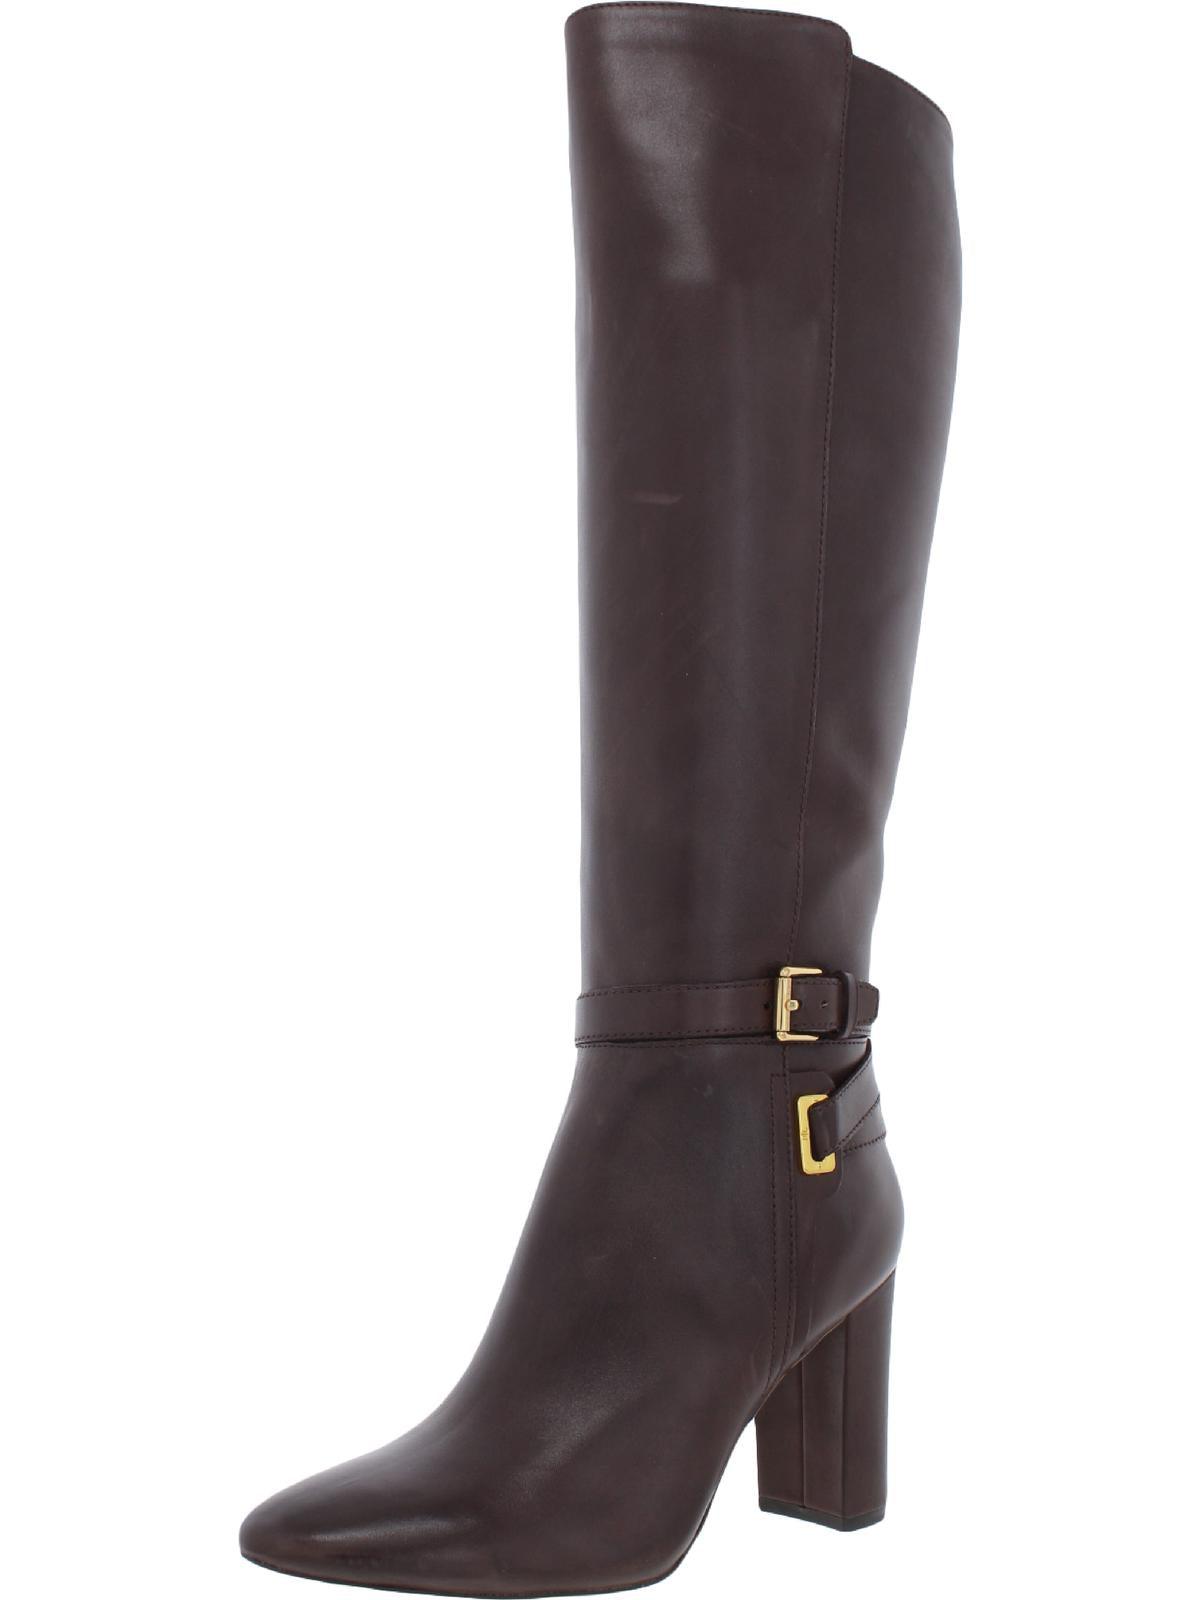 Lauren by Ralph Lauren Mandy Leather Tall Knee-high Boots in Brown | Lyst